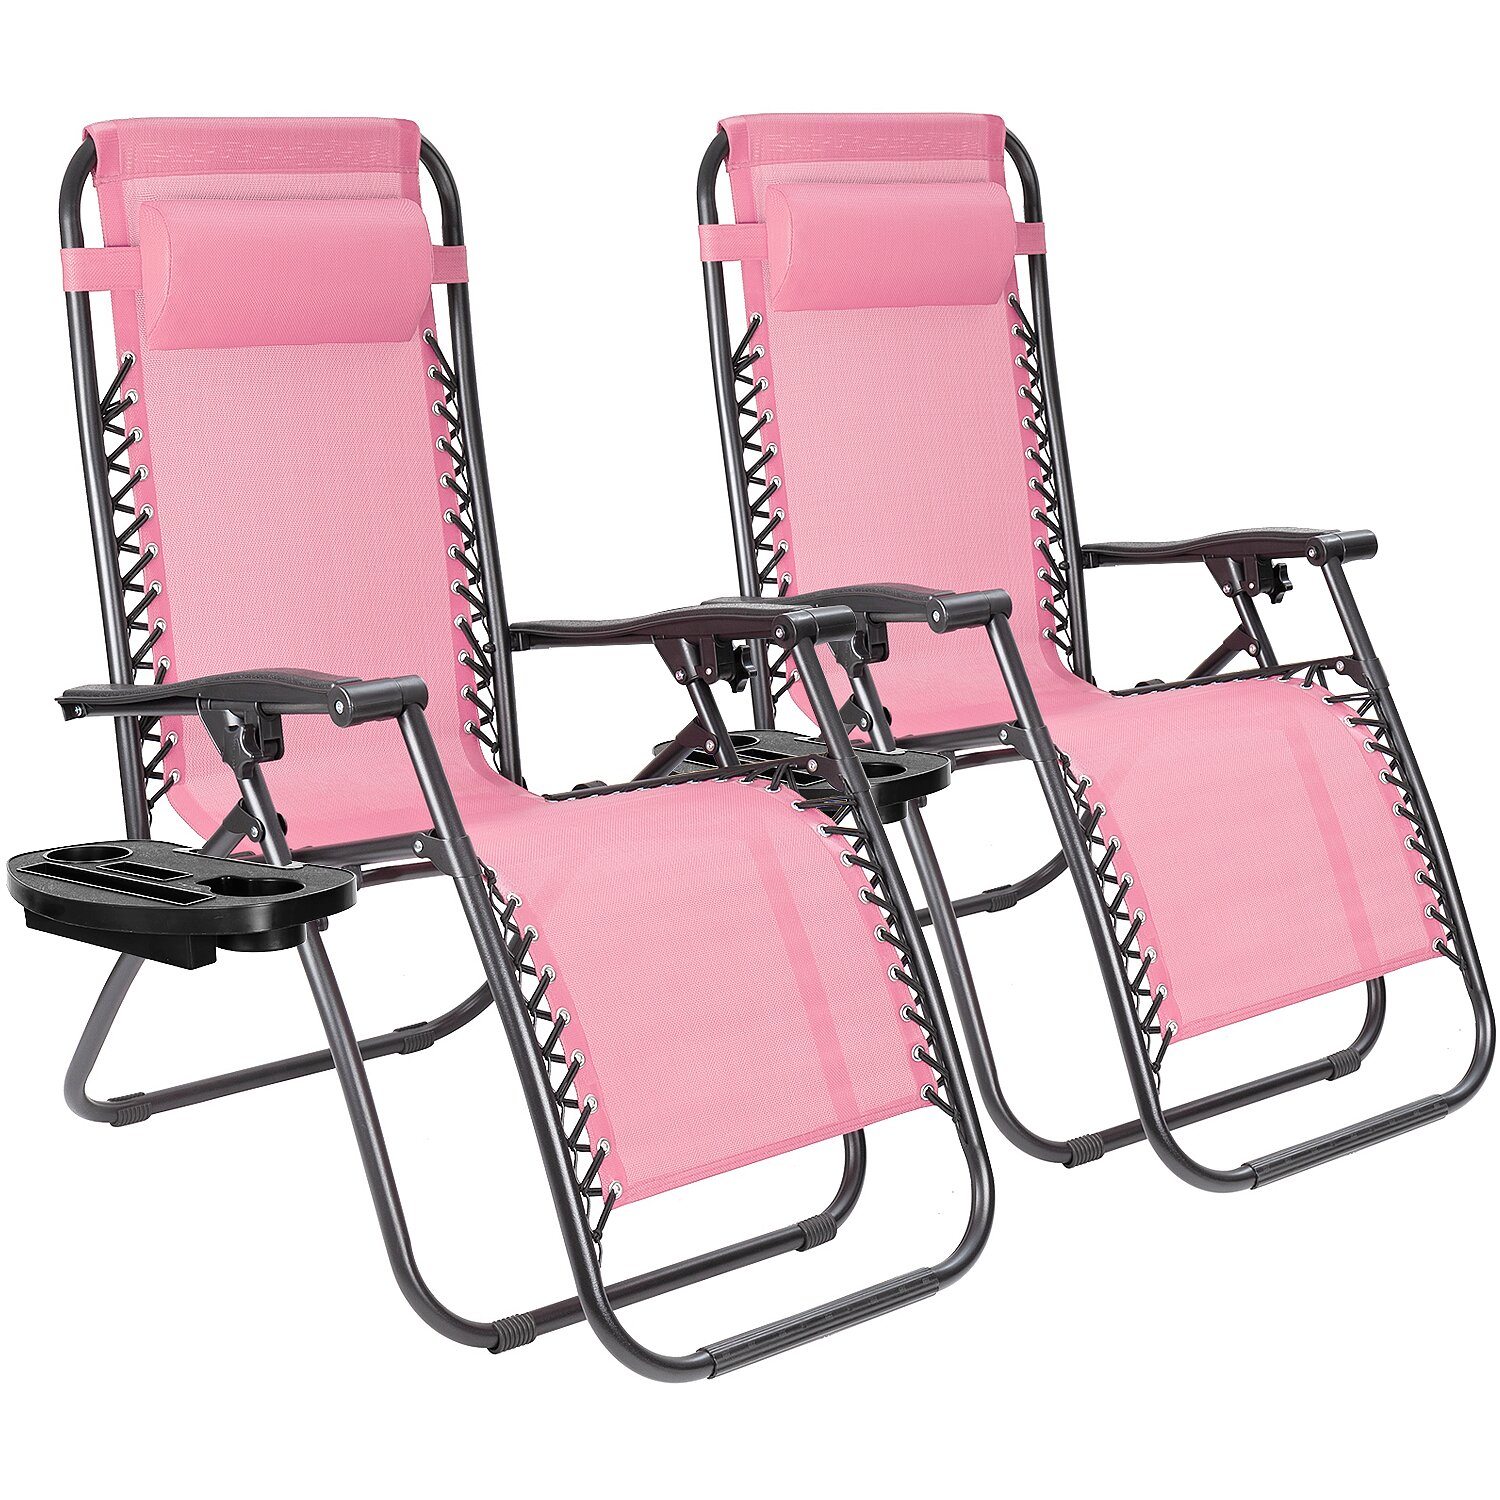 Featured image of post Pink Fold Up Chair : Shop anywhere pink folding chair at urban outfitters today.